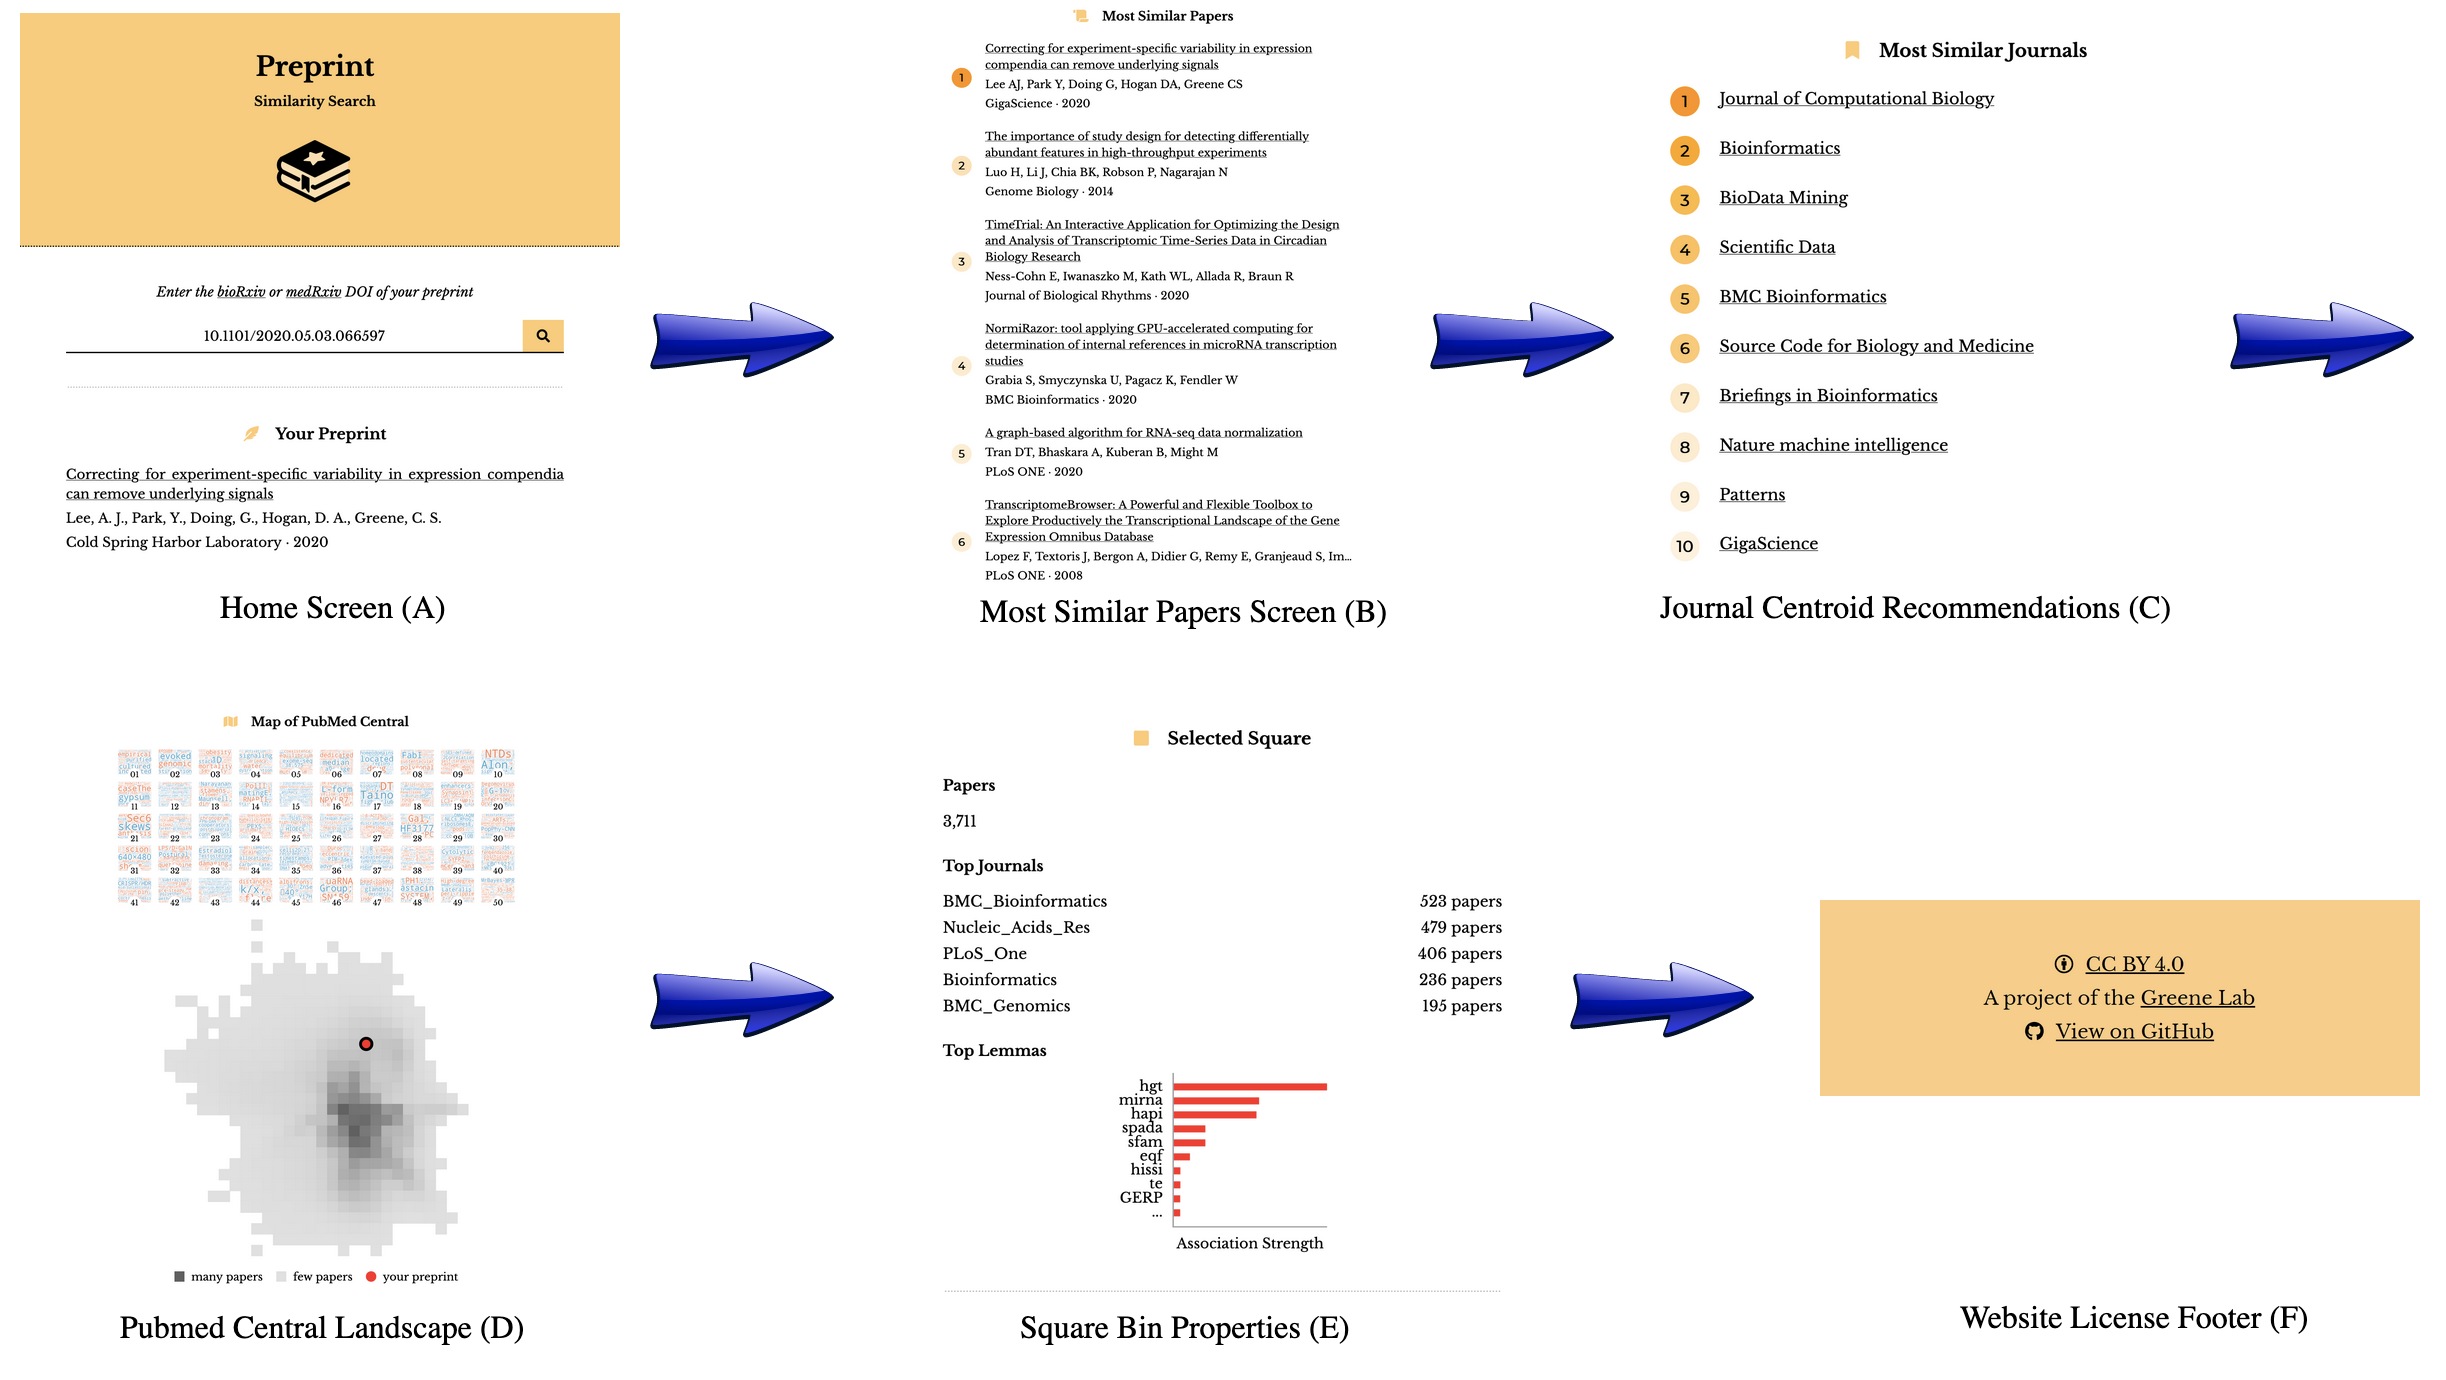 Figure 4: The preprint-similarity-search app workflow allows users to examine where an individual preprint falls in the overall document landscape. A. Starting with the home screen, users can paste in a bioRxiv or medRxiv DOI, which sends a request to bioRxiv or medRxiv. Next, the app preprocesses the requested preprint and returns a listing of (B) the top ten most similar papers and (C) the ten closest journals. D. The app also displays the location of the query preprint in PMC. E. Users can select a square within the landscape to examine statistics associated with the square, including the top journals by article count in that square and the odds ratio of tokens.